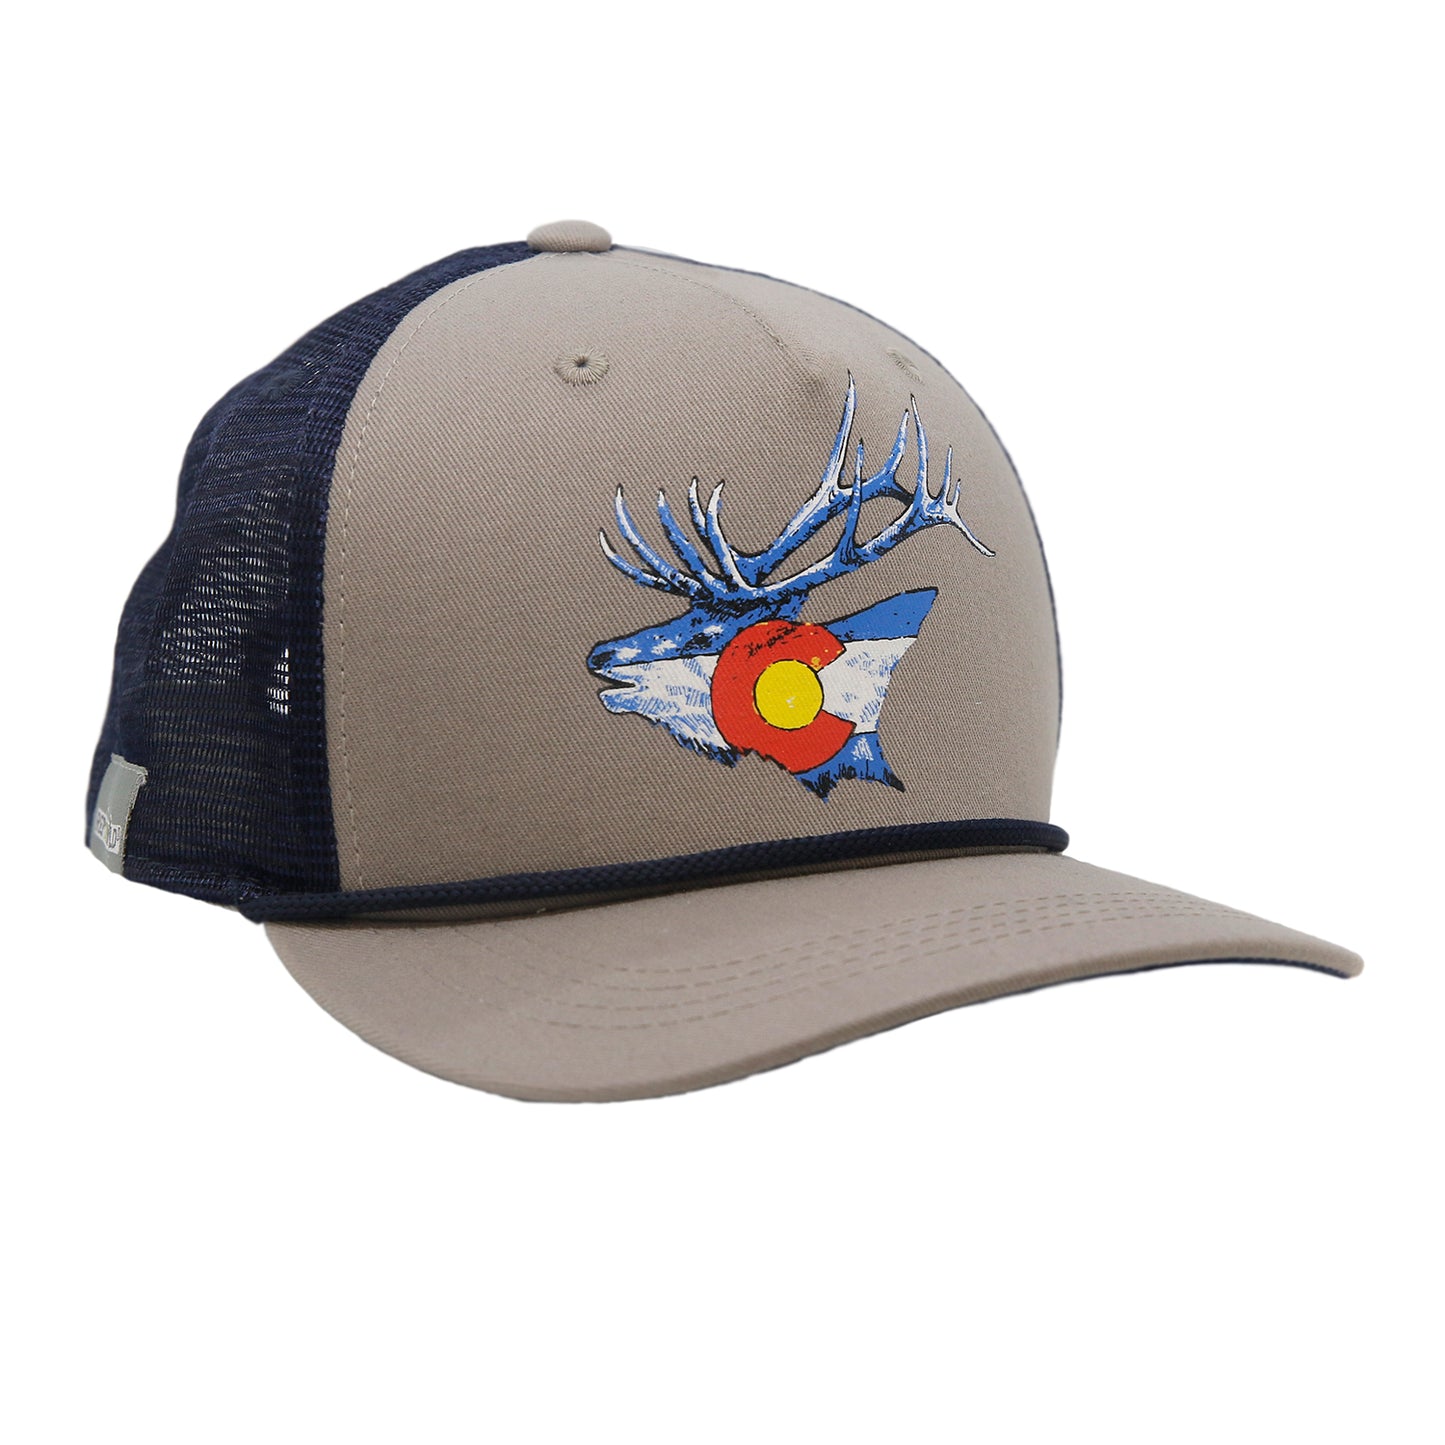 A hat with navy mesh and light gray fabric in front has an elk head in the colors and design of the colorado flag